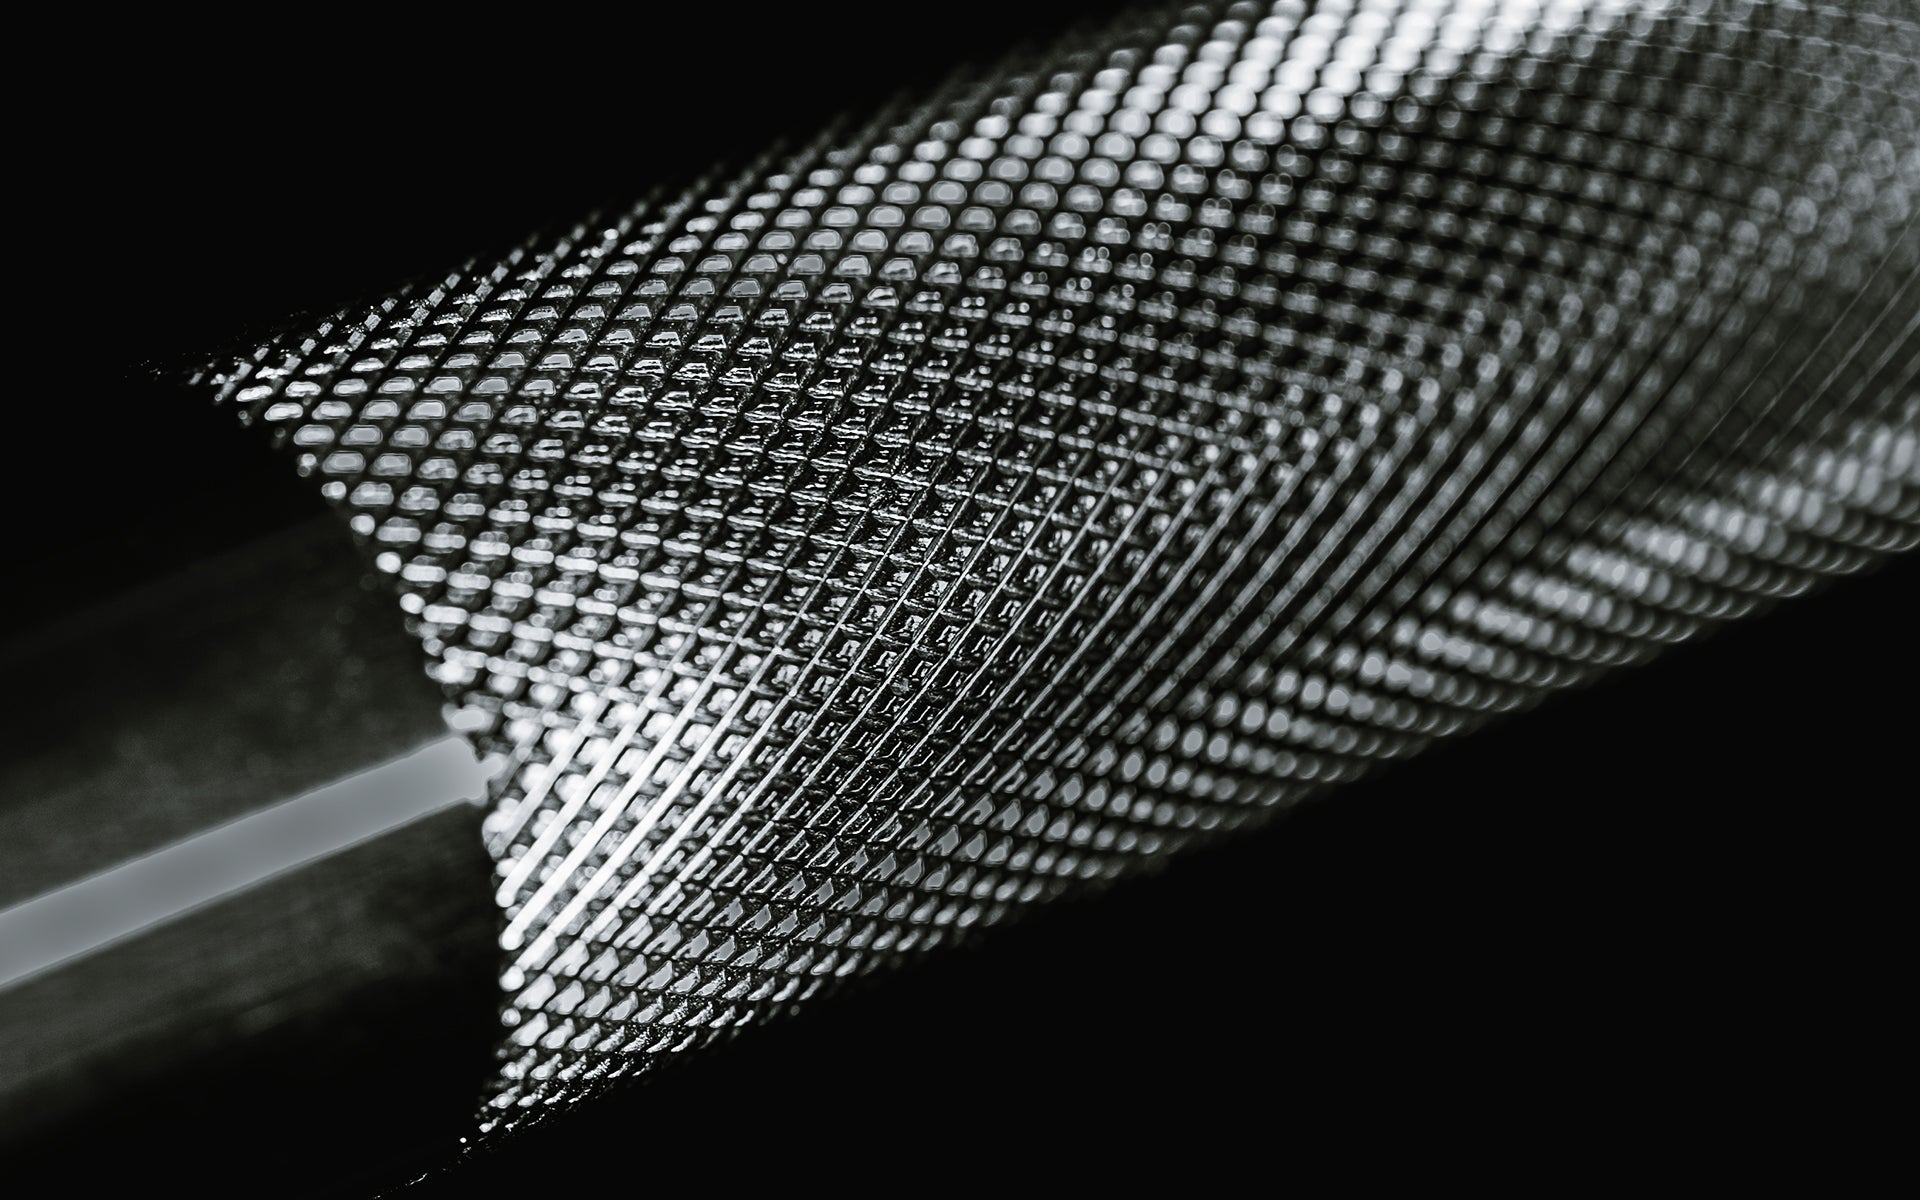 Close-up view of the knurling on the REP 15kg Teton Training Bar.